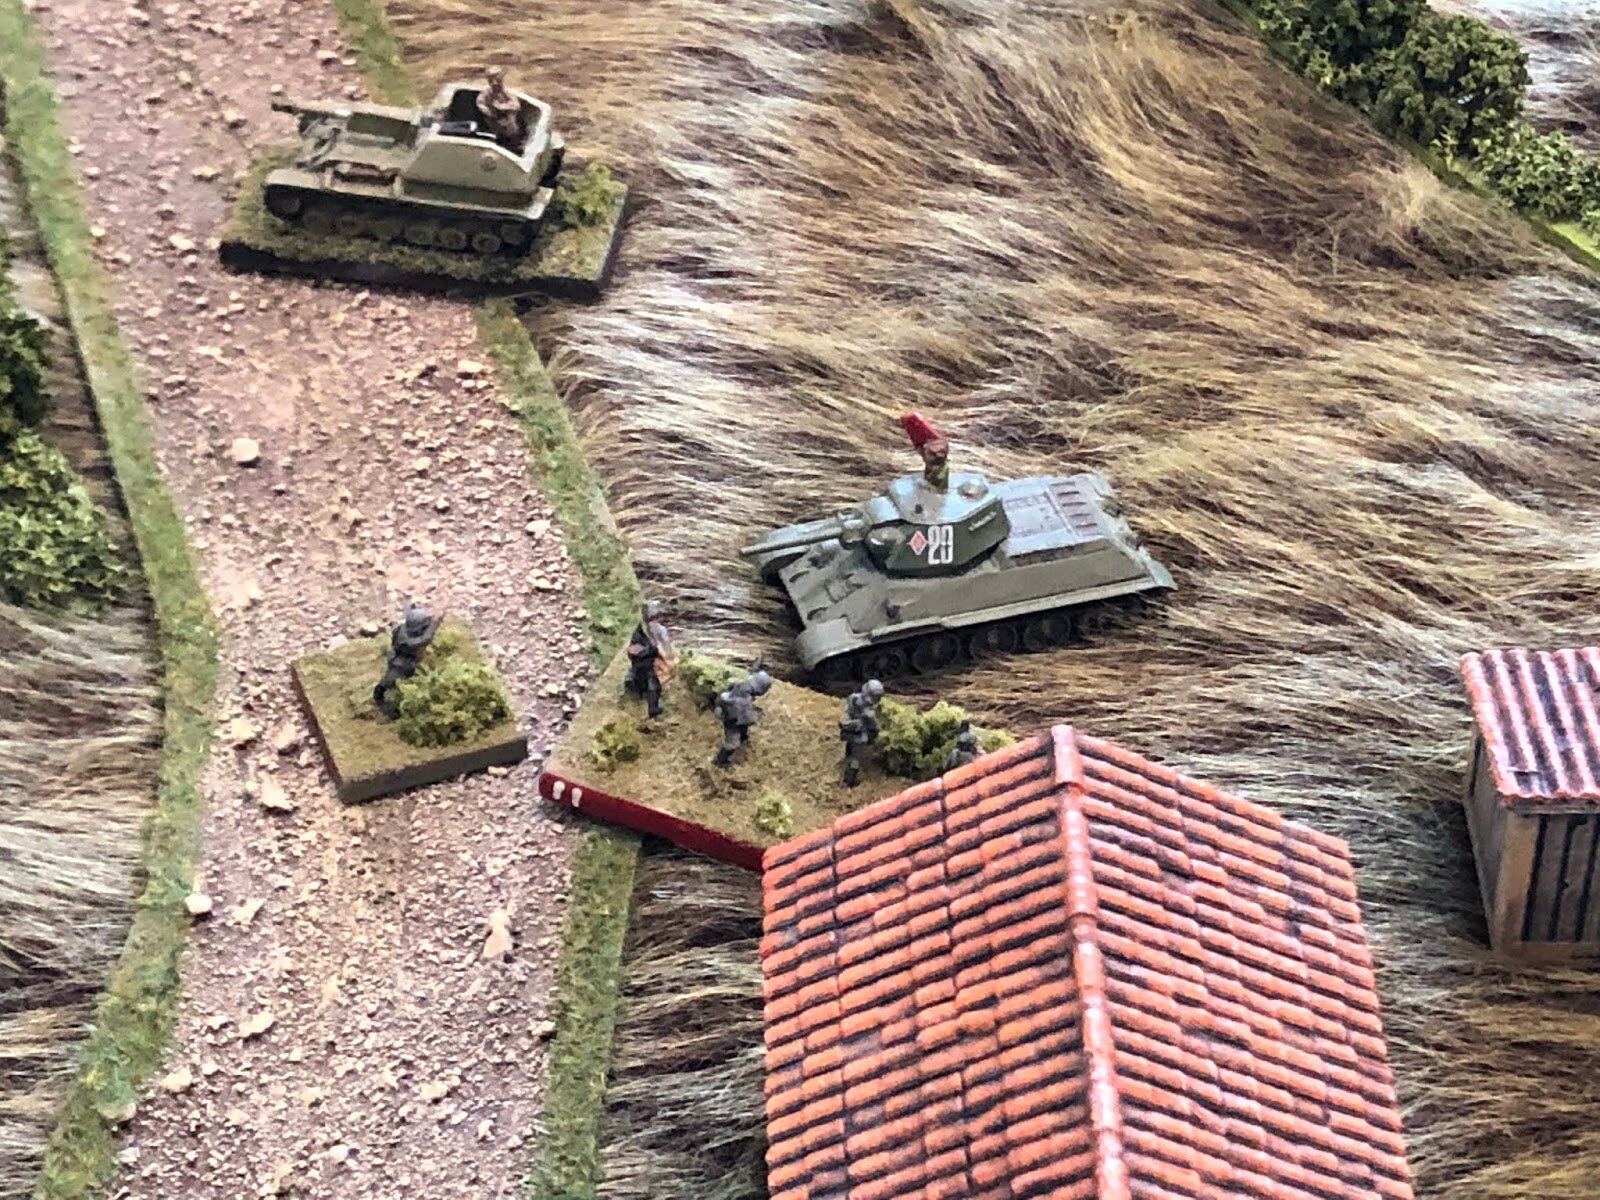  Then leaps to his feet and let’s out a blood-curdling yell for his men to follow him. The German infantrymen rush the 10 metres to the massive Soviet armoured beast, braving fire from its bow machine gun and its commander’s pistol, firing into visio